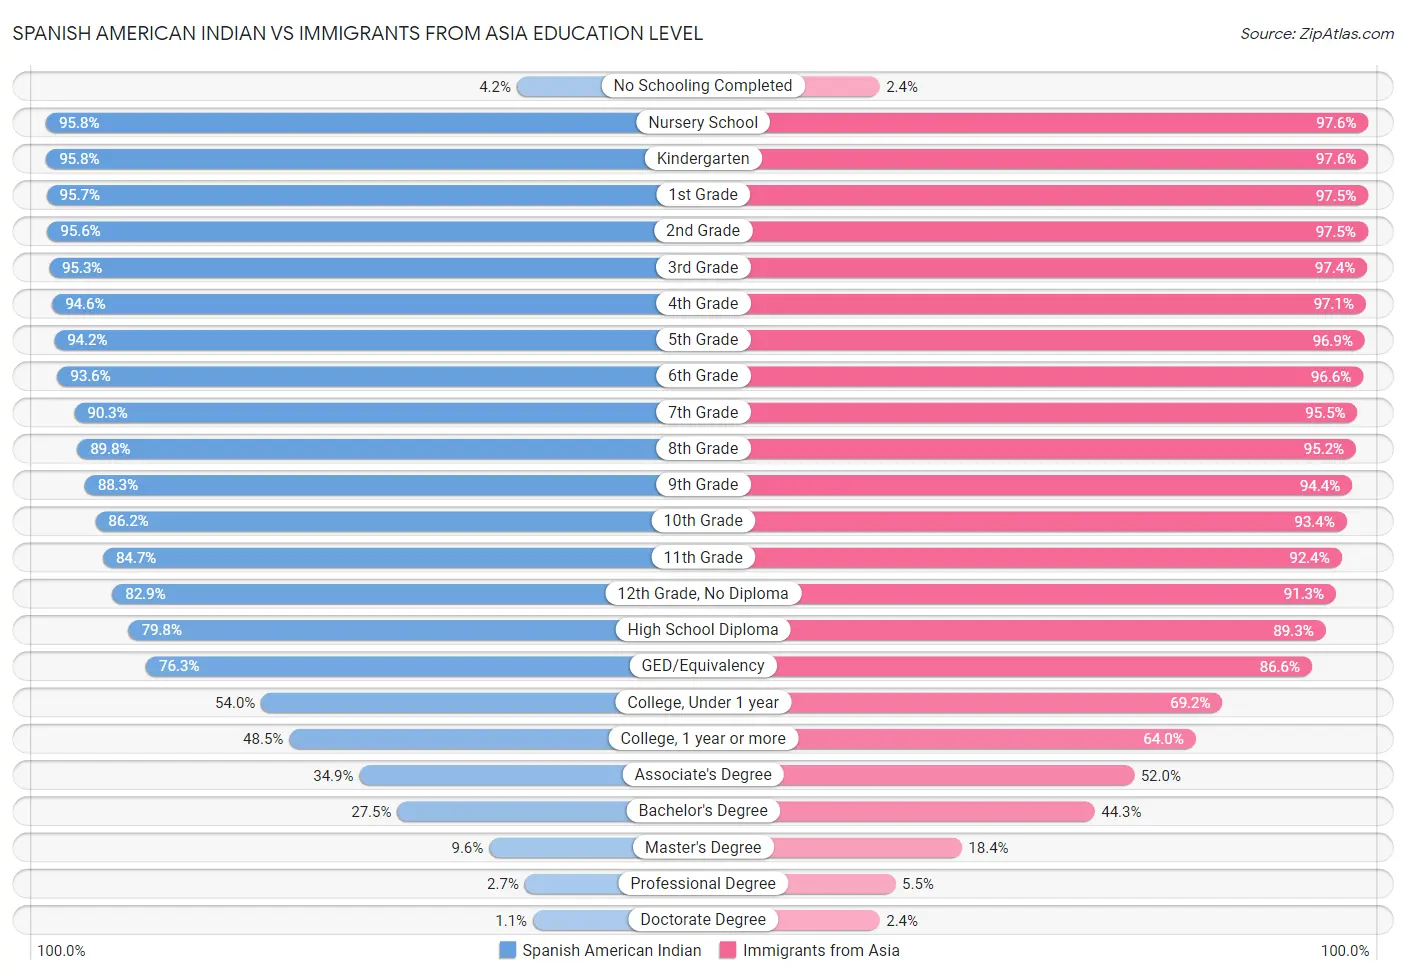 Spanish American Indian vs Immigrants from Asia Education Level